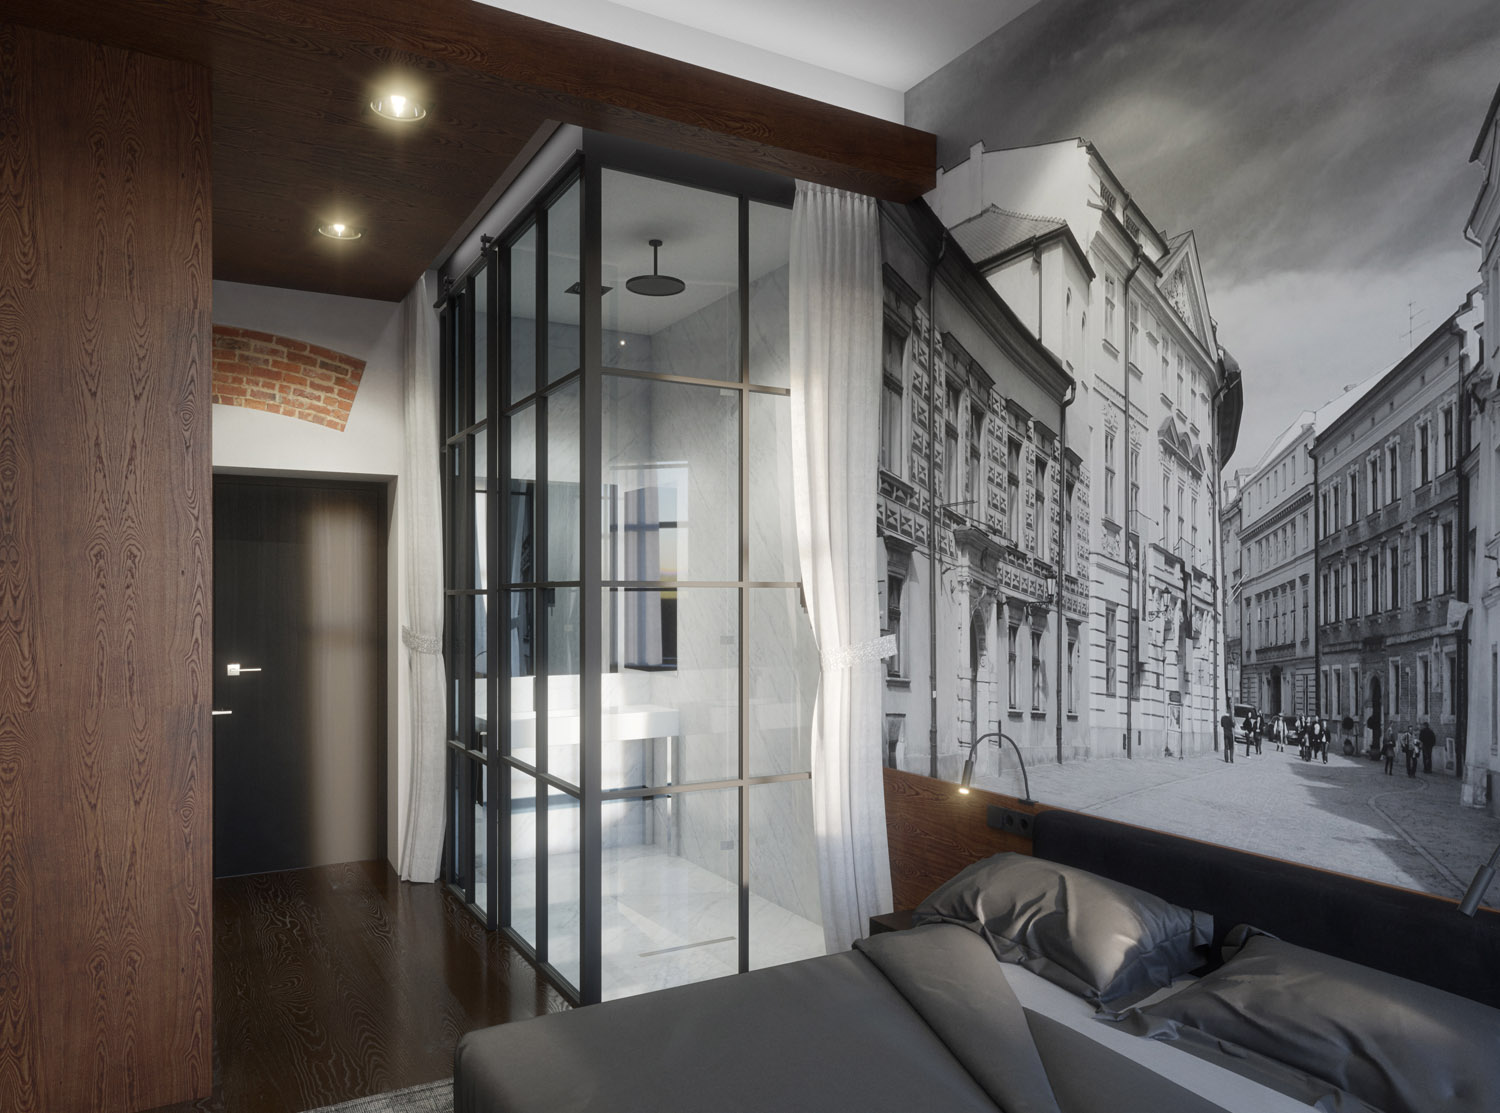 Hotel room in black and white - 3D visualization